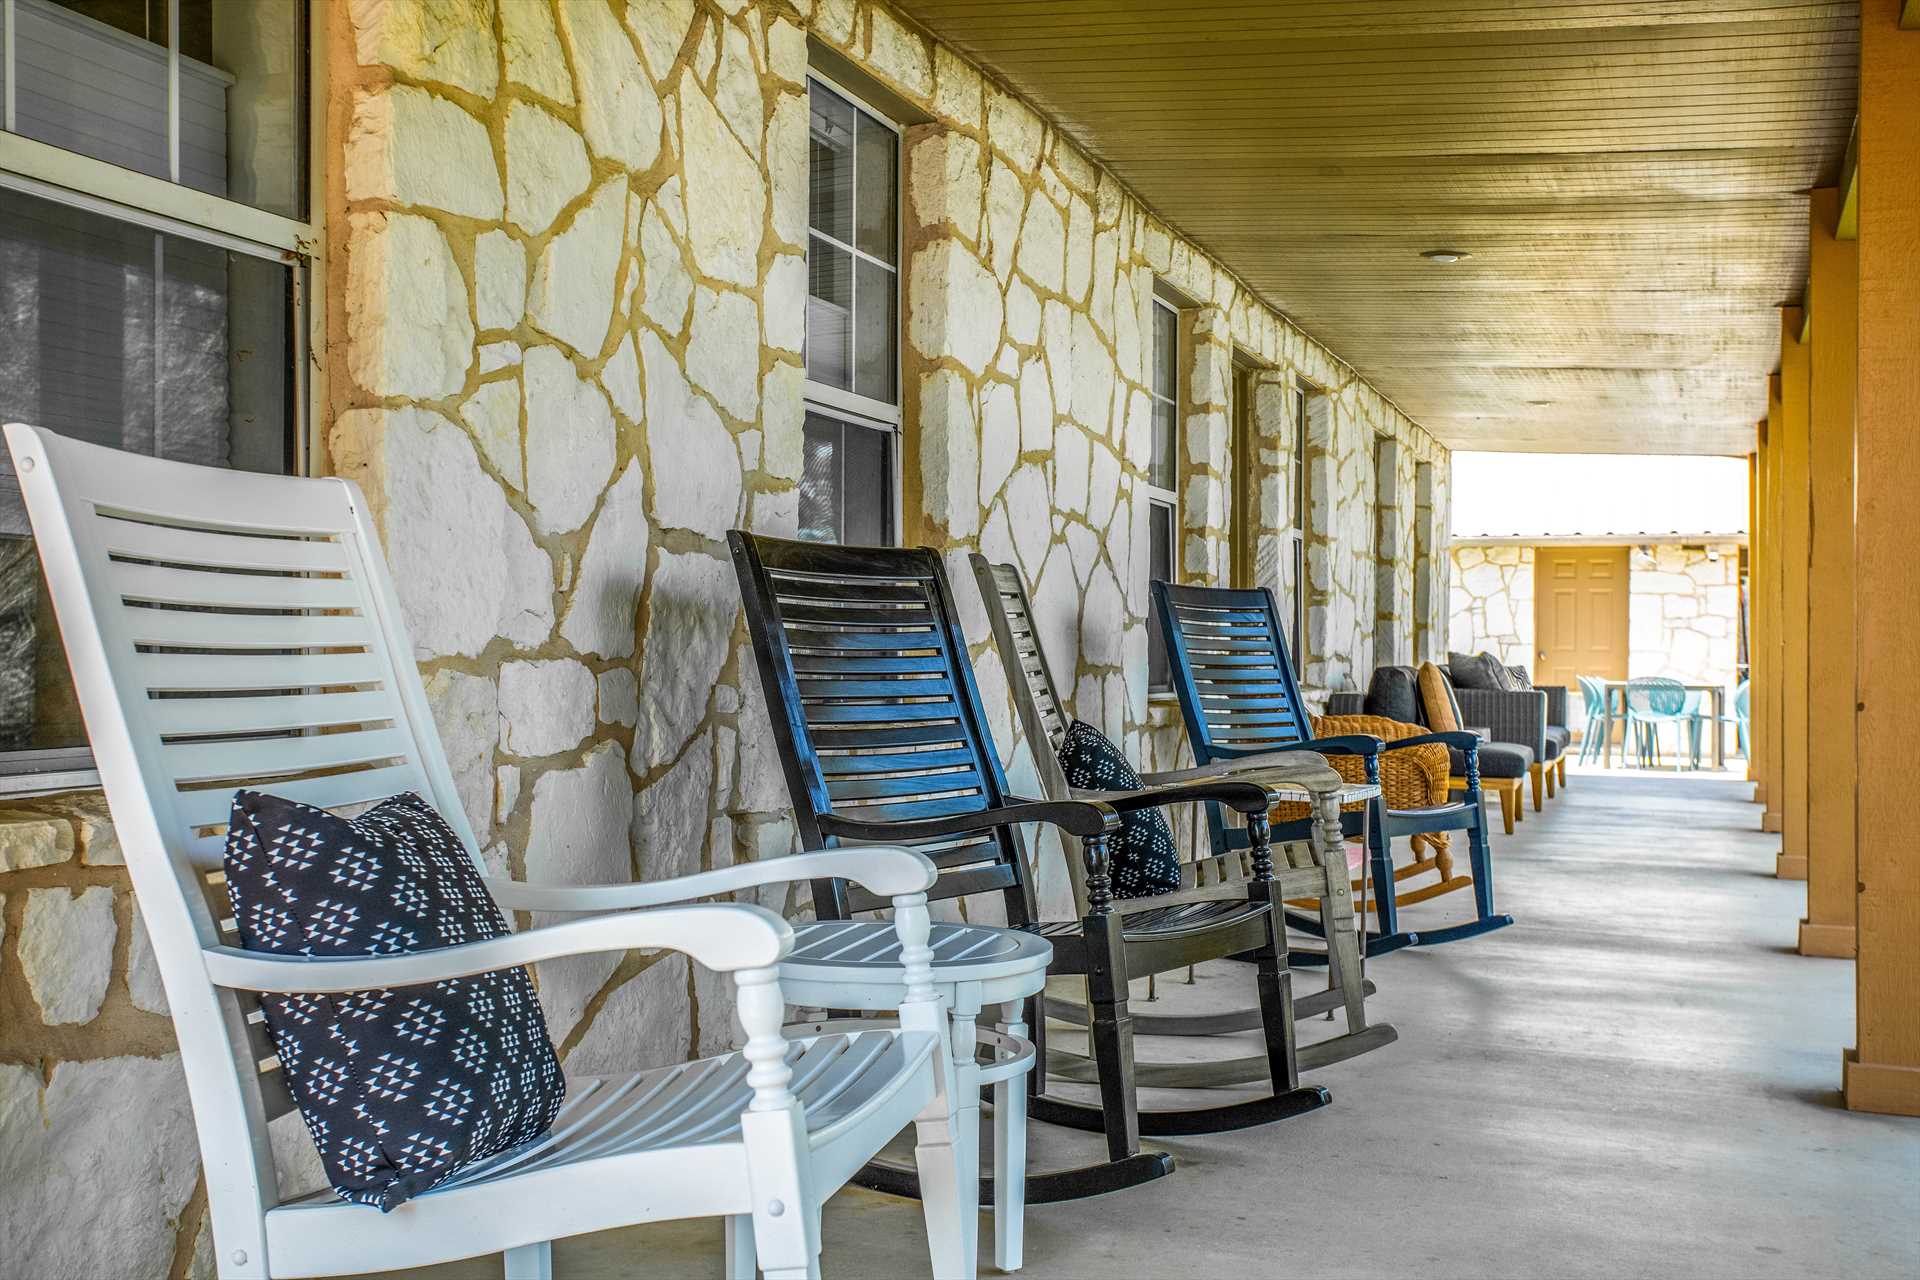                                                 Cool and soft comfort greets you on the shaded patio, complete with plush outdoor furniture.